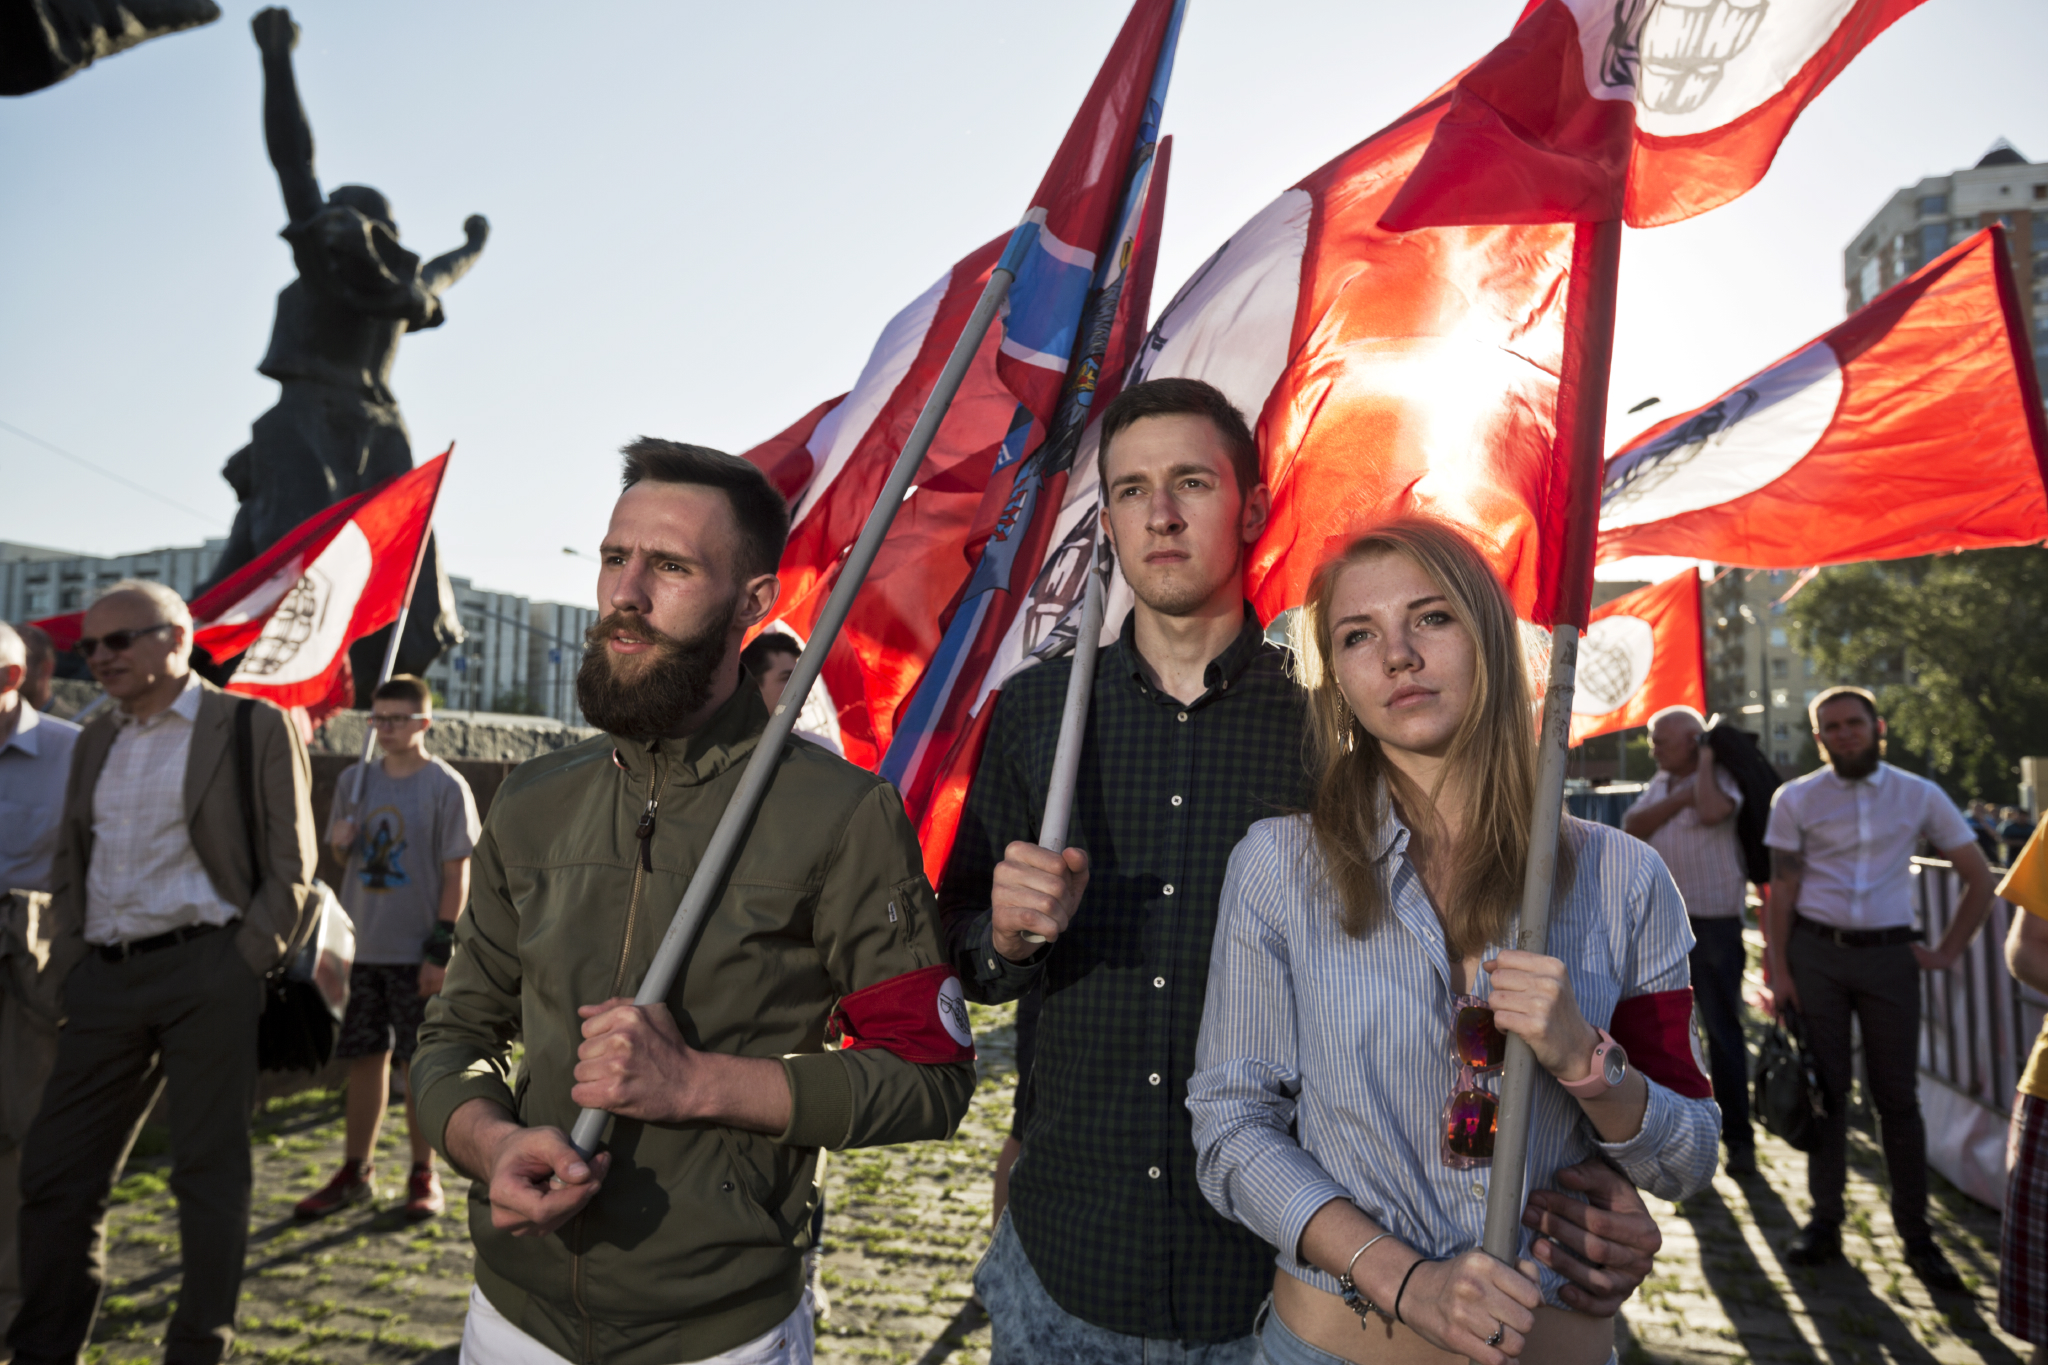  Kostya , 21, and his girlfriend Anastasiya, 20, supporters of the Other Russia, an opposition party, rally in Moscow displaying flags and armbands with their symbol, a grenade. The Other Russia was formed by members of a banned ultranationalist poli